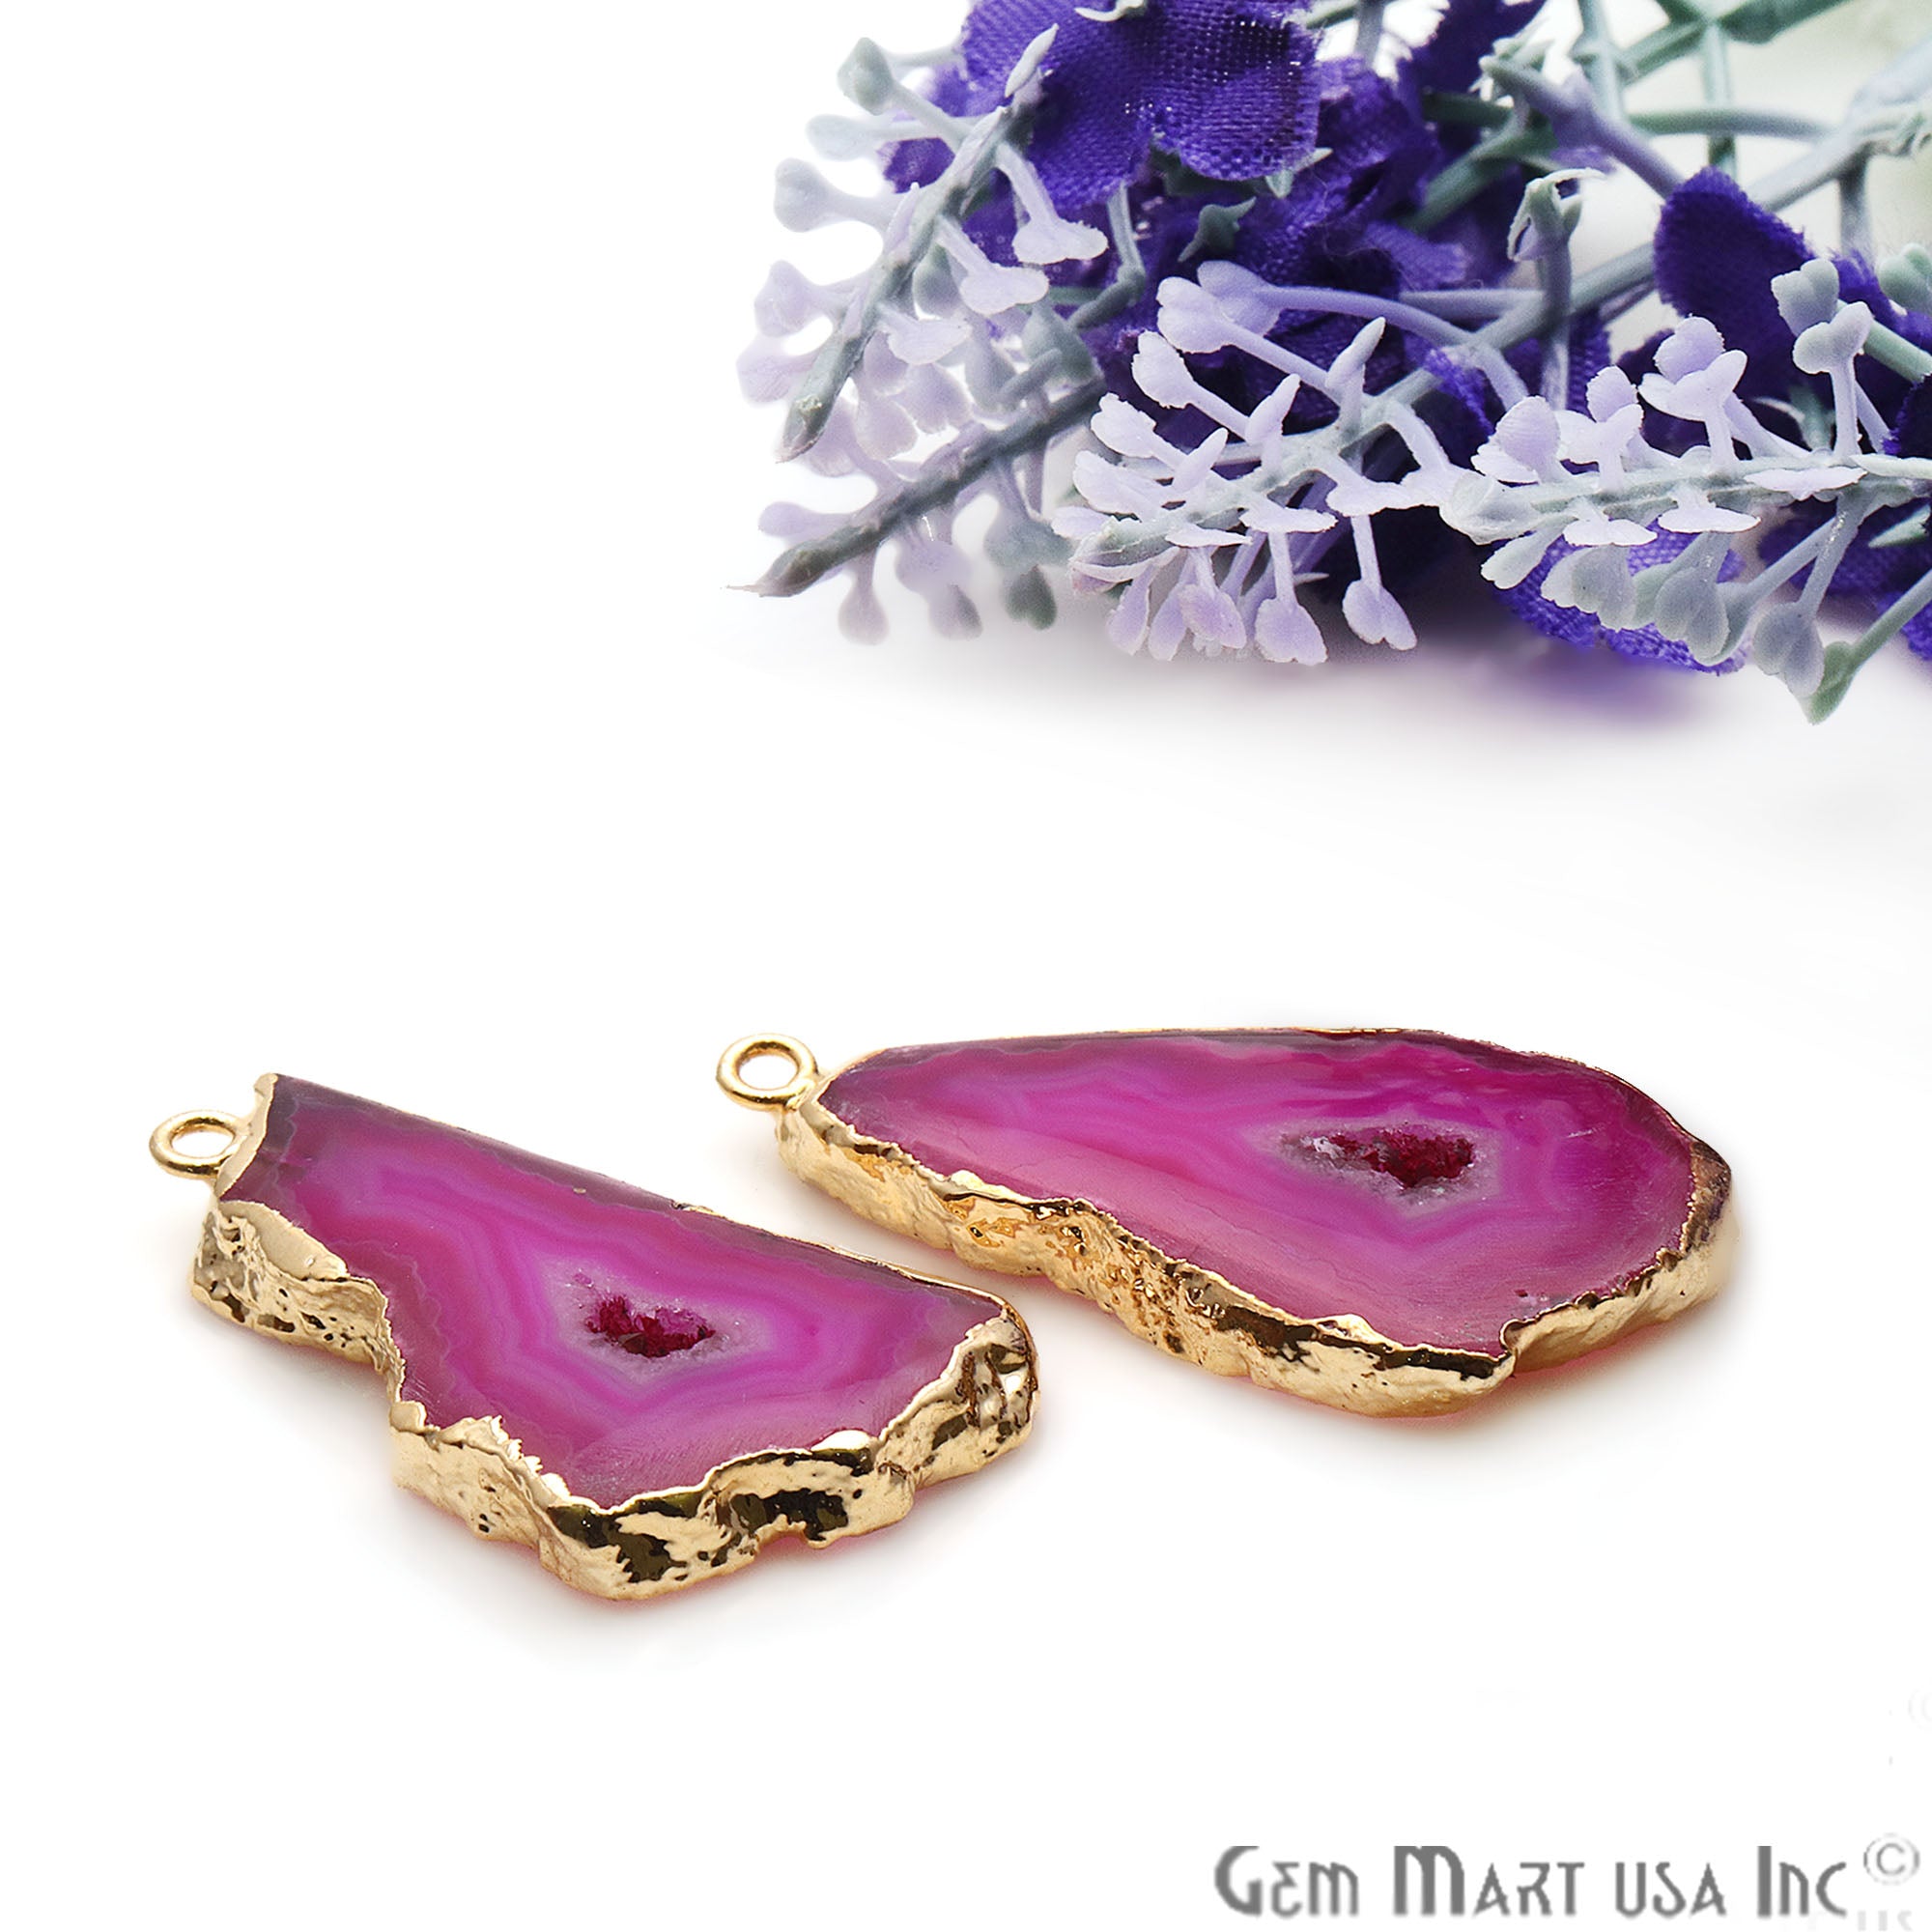 Agate Slice 36x17mm Organic Gold Electroplated Gemstone Earring Connector 1 Pair - GemMartUSA